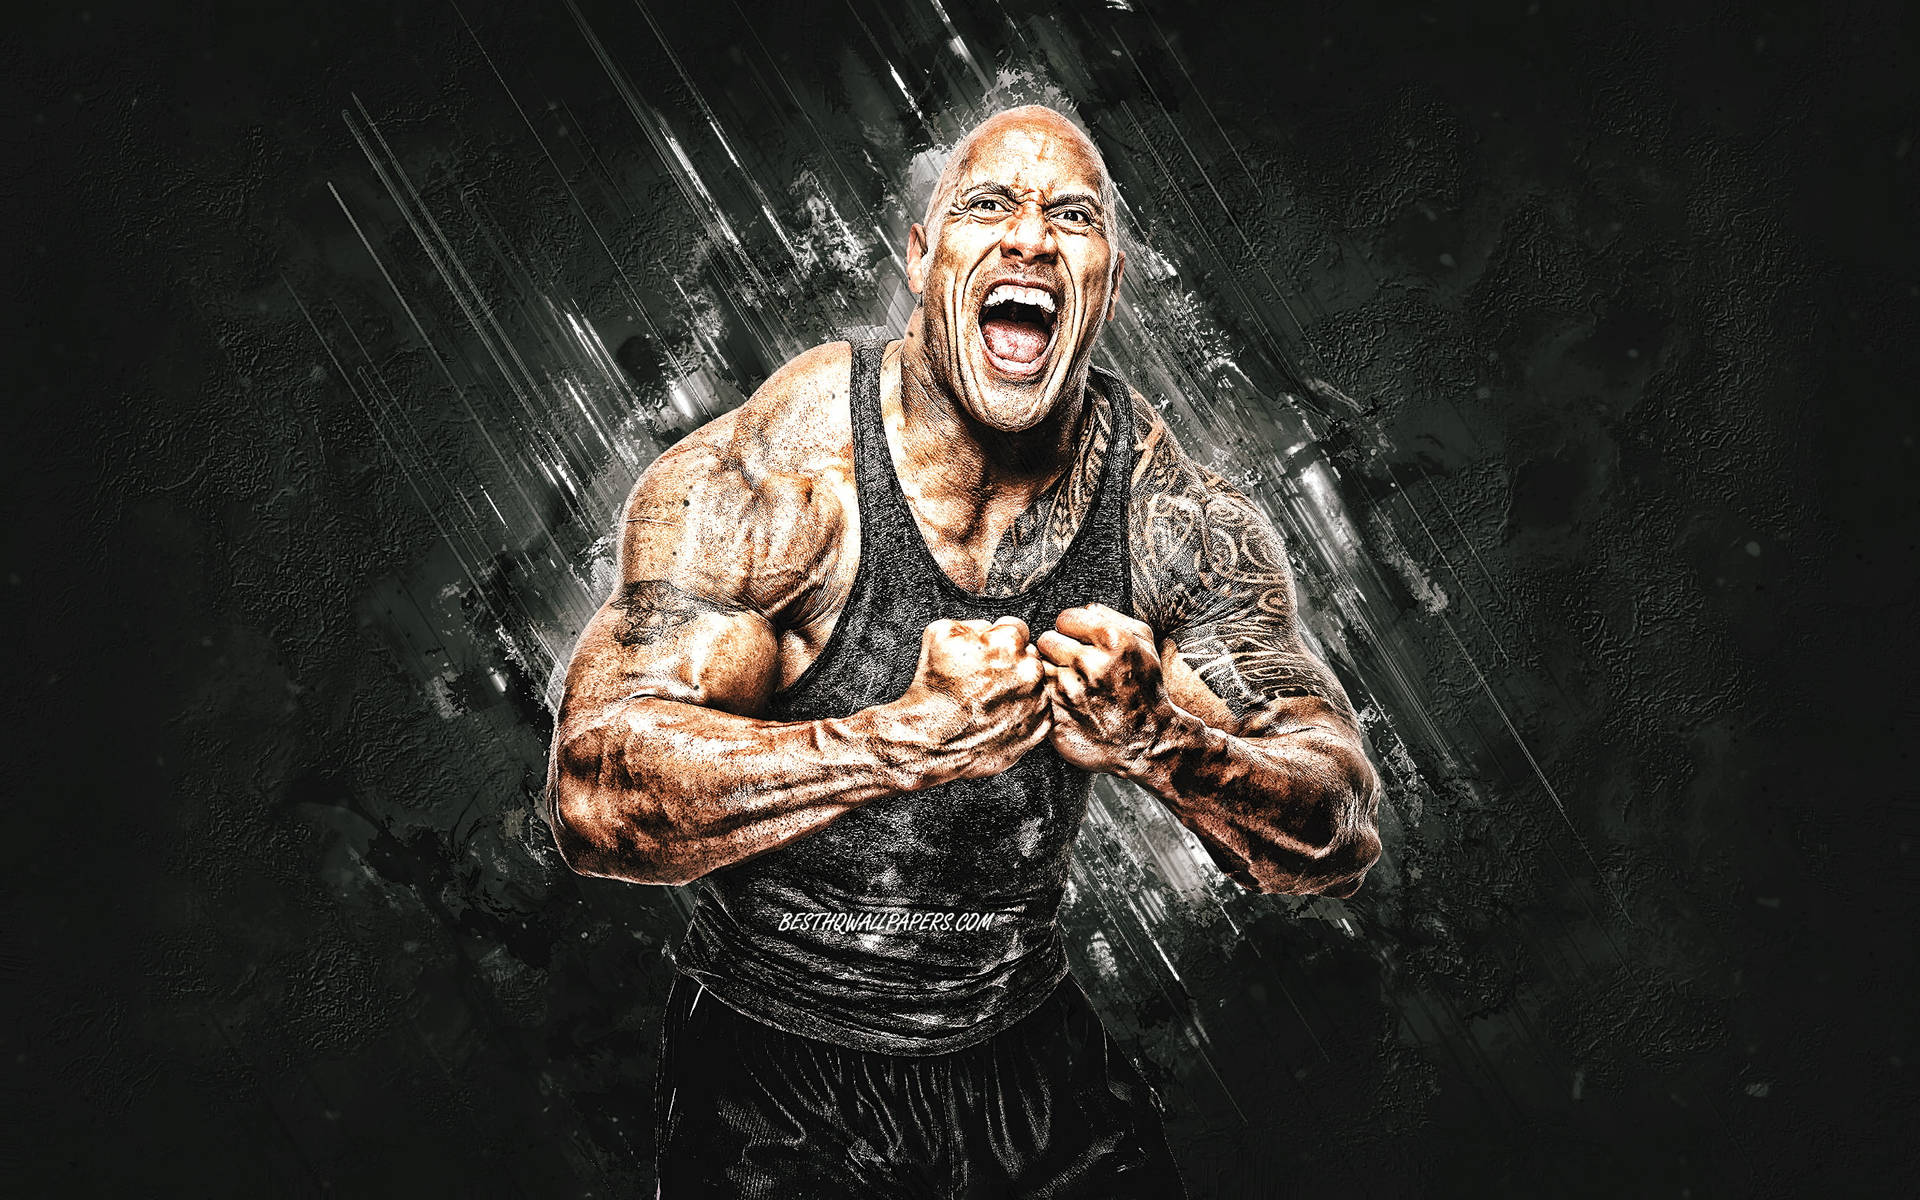 Free The Rock Wallpaper Downloads, [100+] The Rock Wallpapers for FREE |  